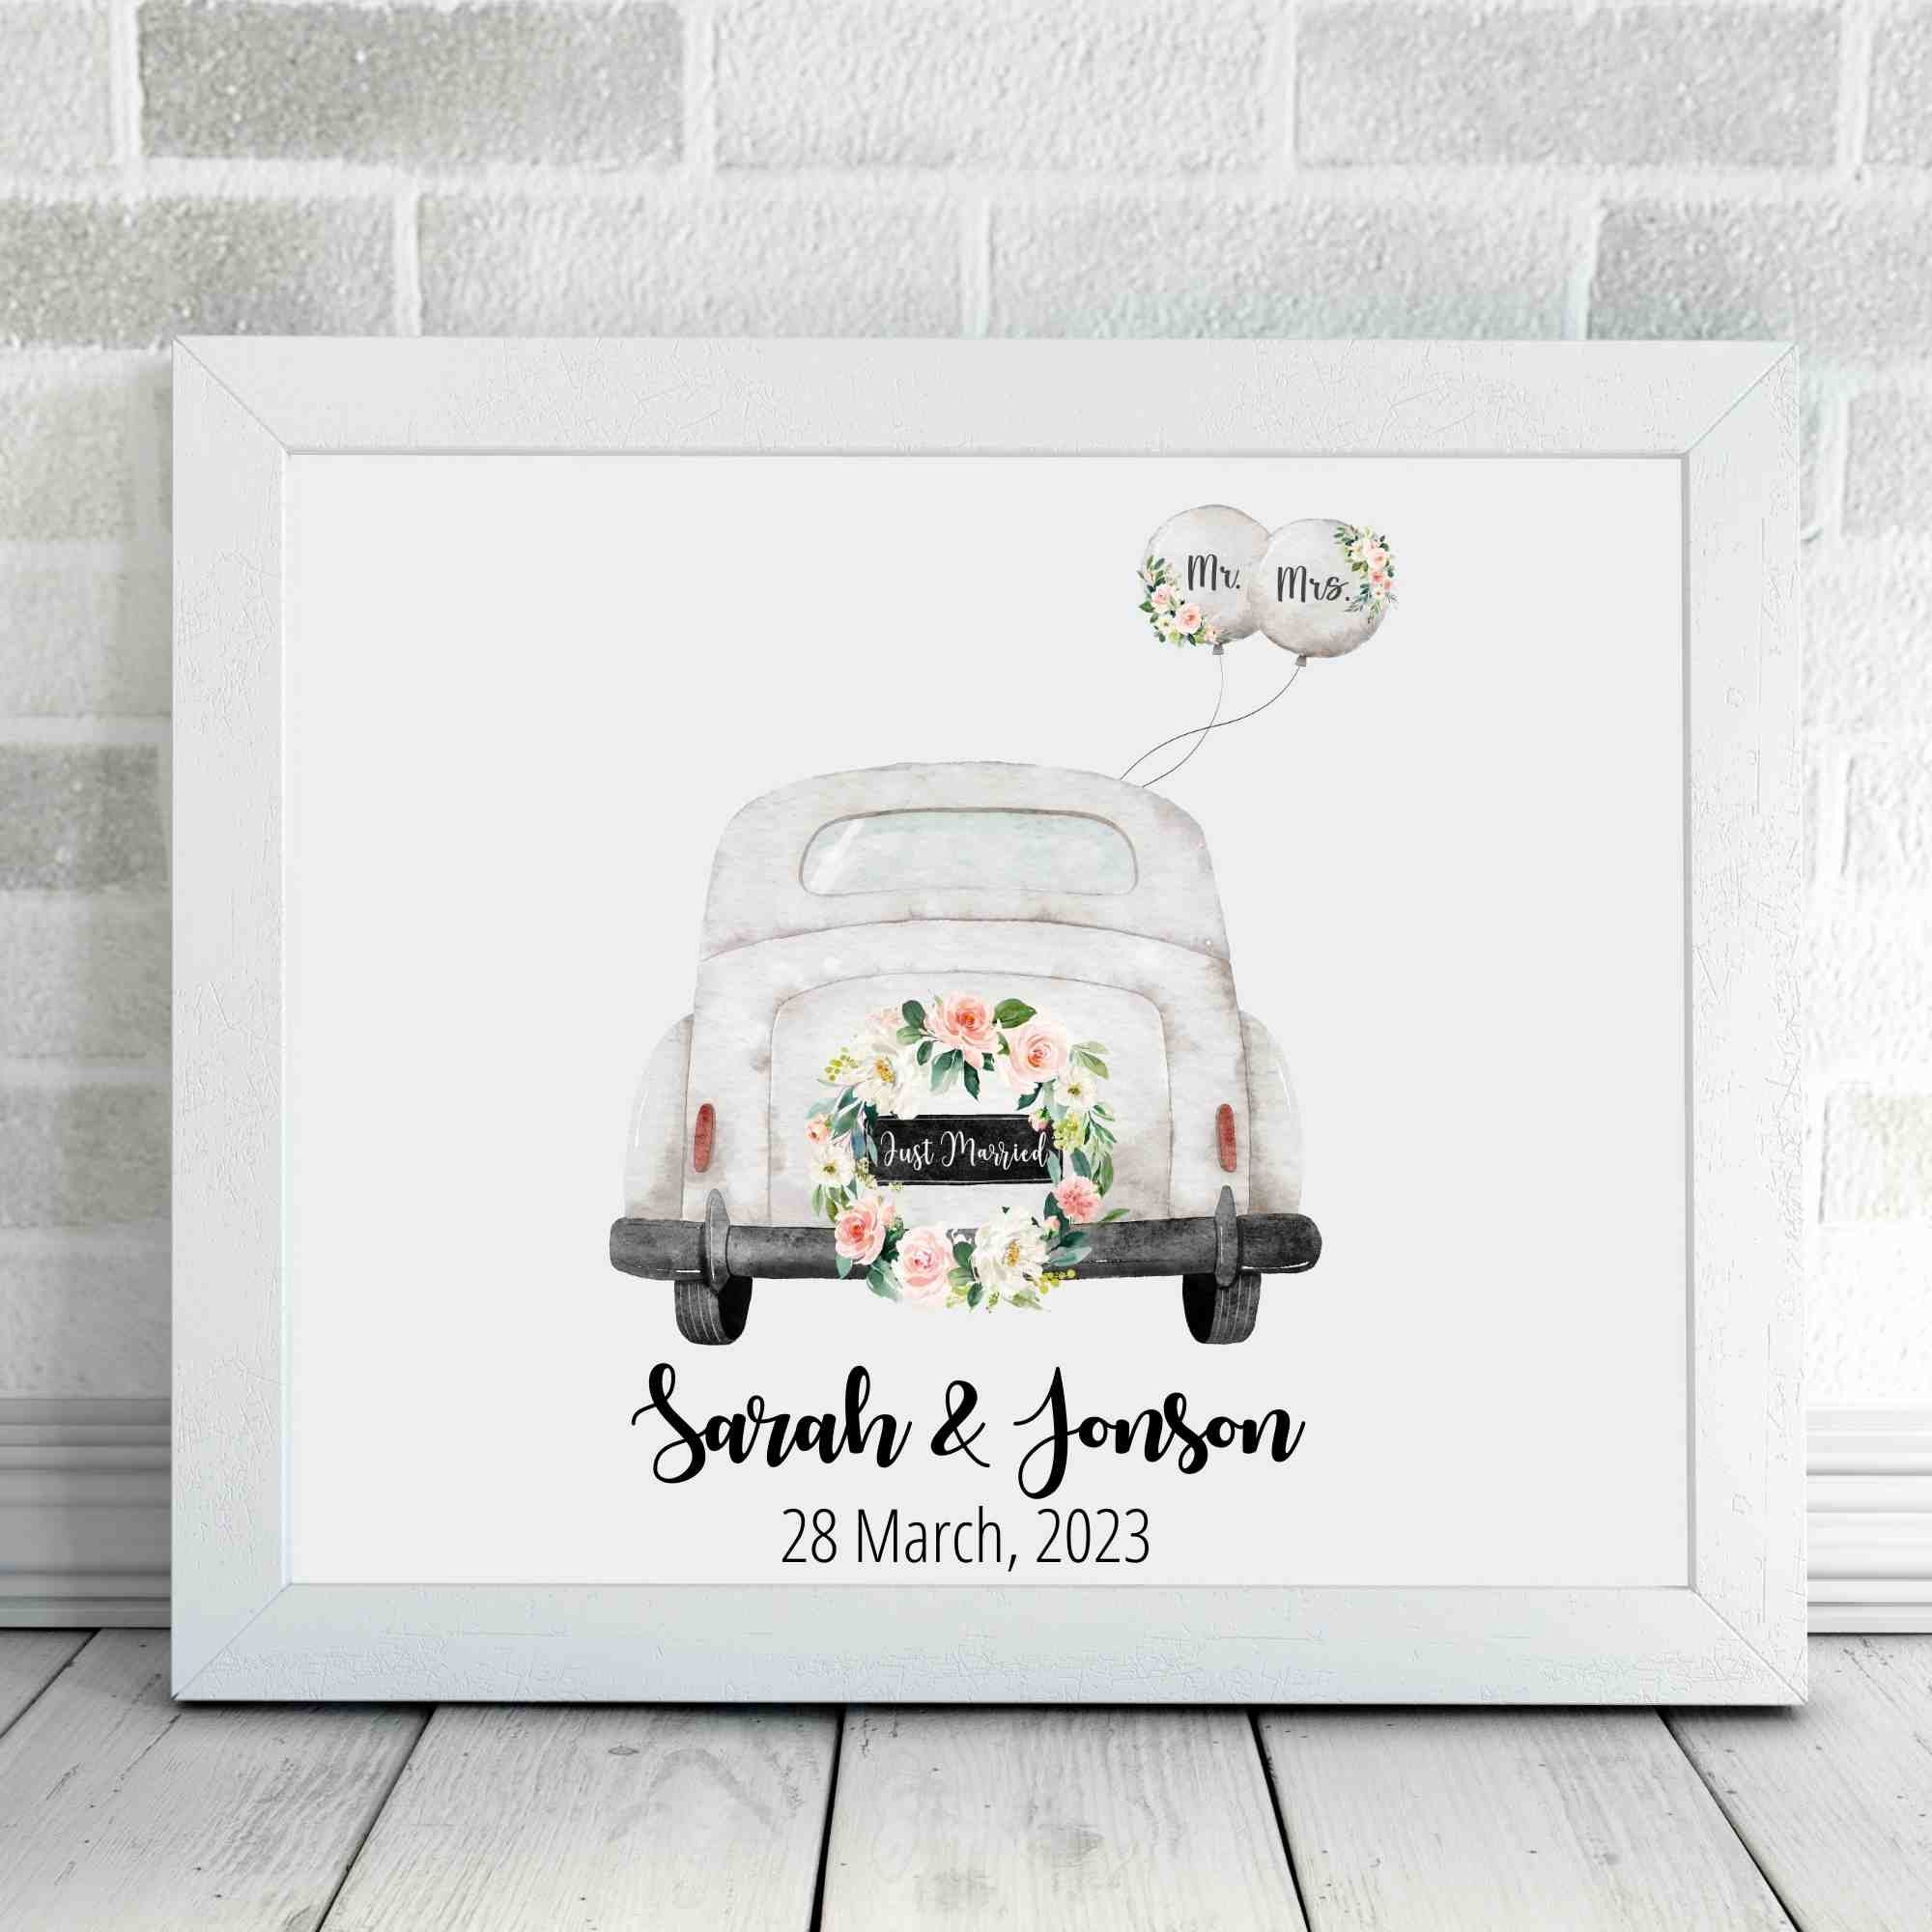 Just married car Poster for Sale by Marry-me